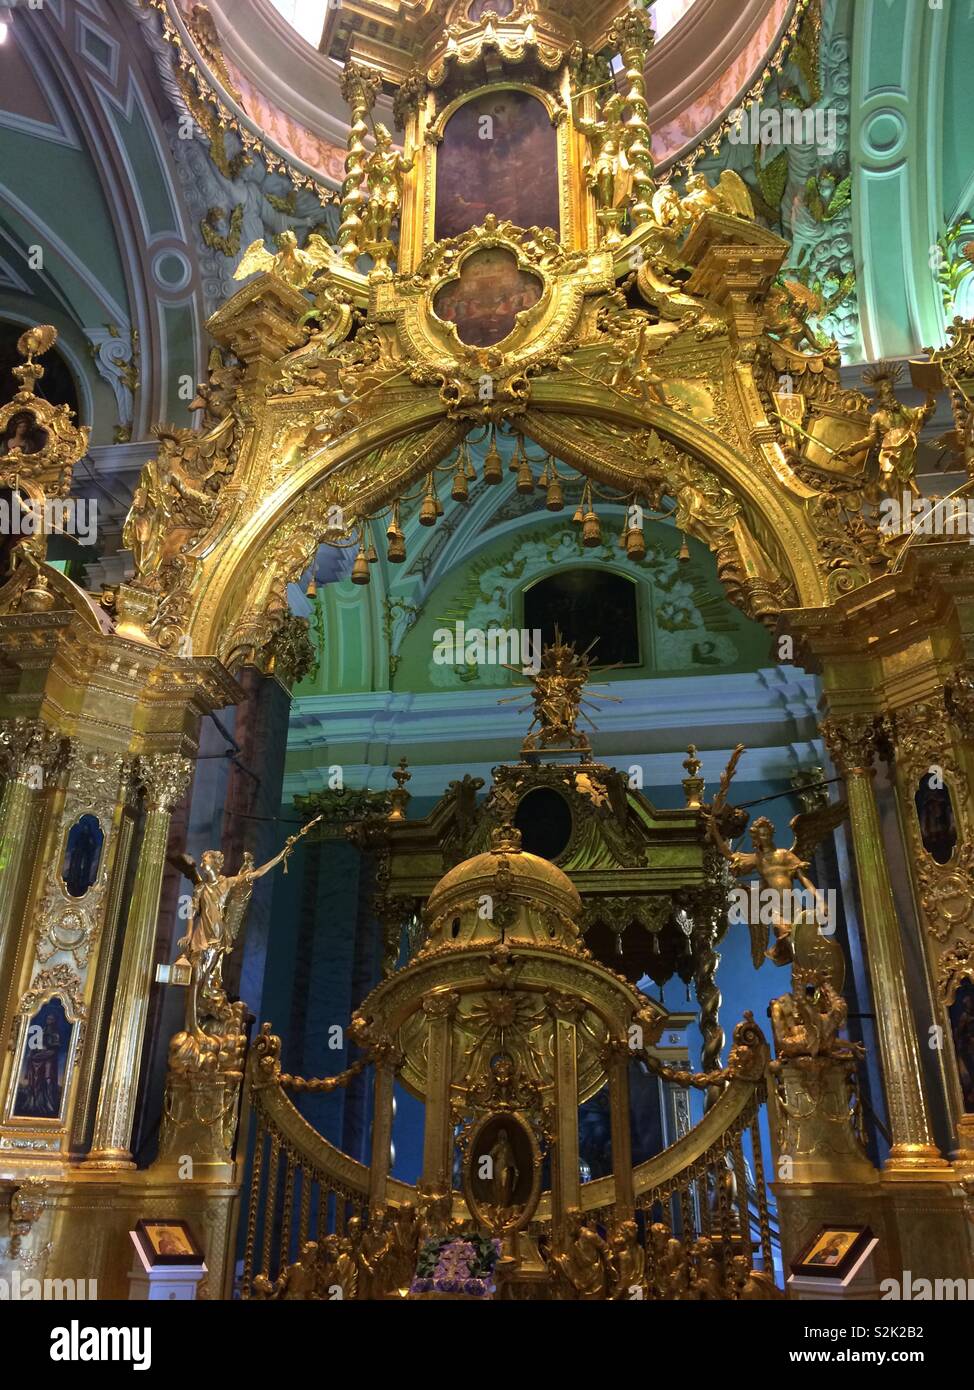 Interior of the Cathedral in Peter and Paul fortress in St. Petersburg Russia full of gold and ornate architectural details at the altar Stock Photo